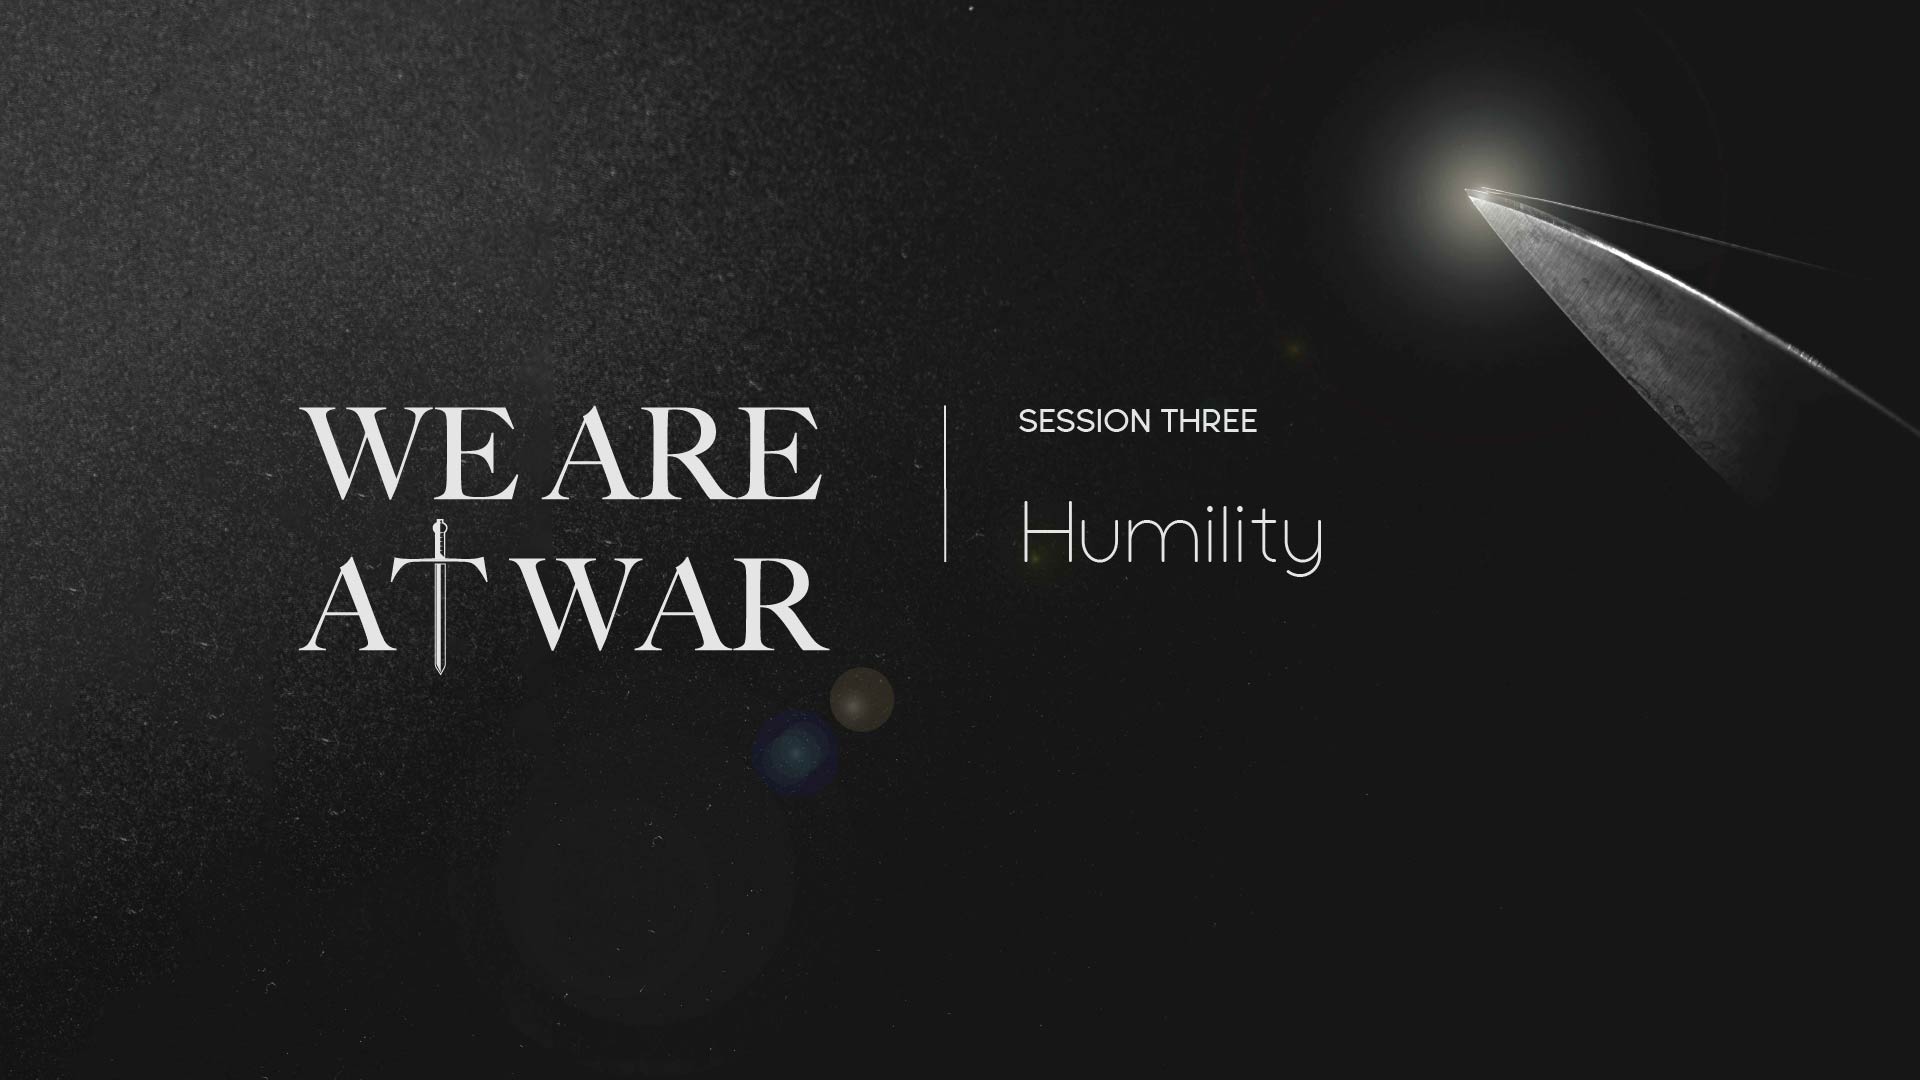 Video image for 'Humility’ about knowing our place and that the power is God’s